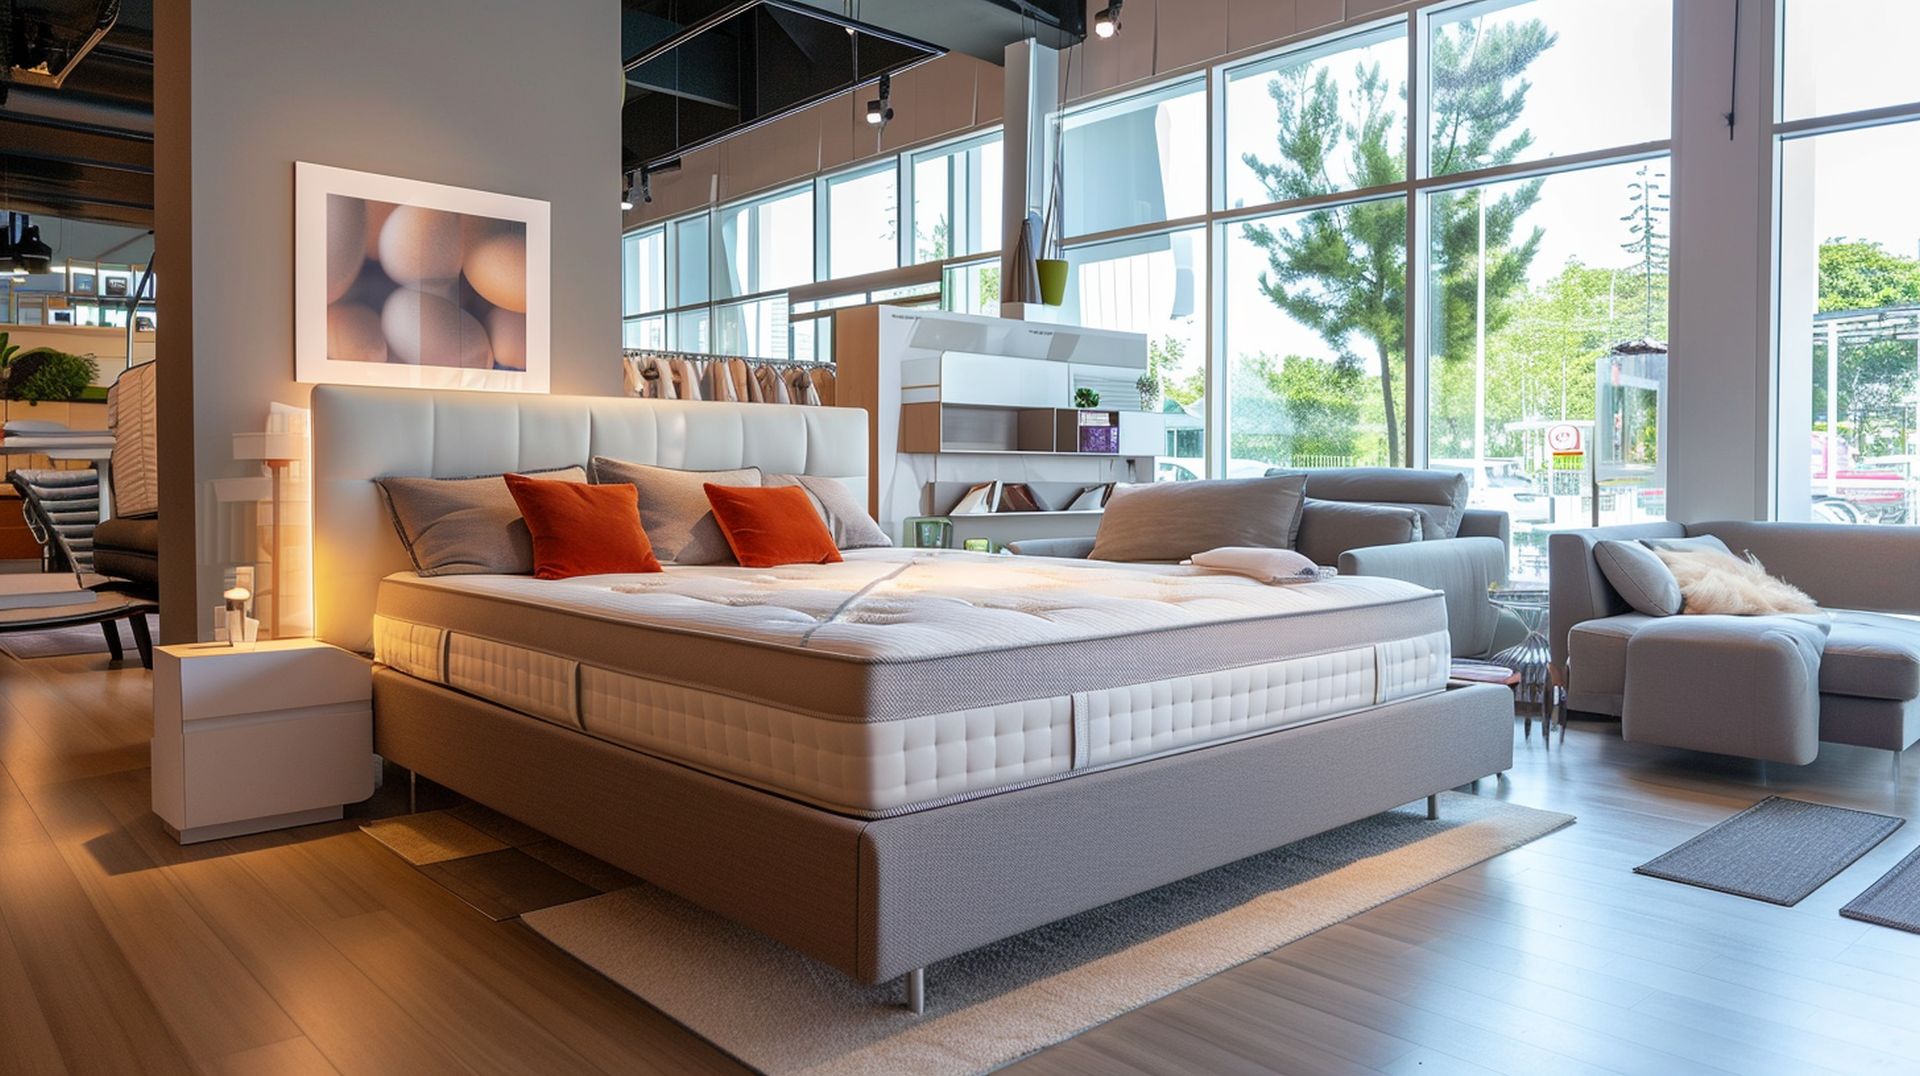 If you're looking for a new bed, mattress stores in Avondale offer the best customer and delivery service, financing, and warranties in Arizona